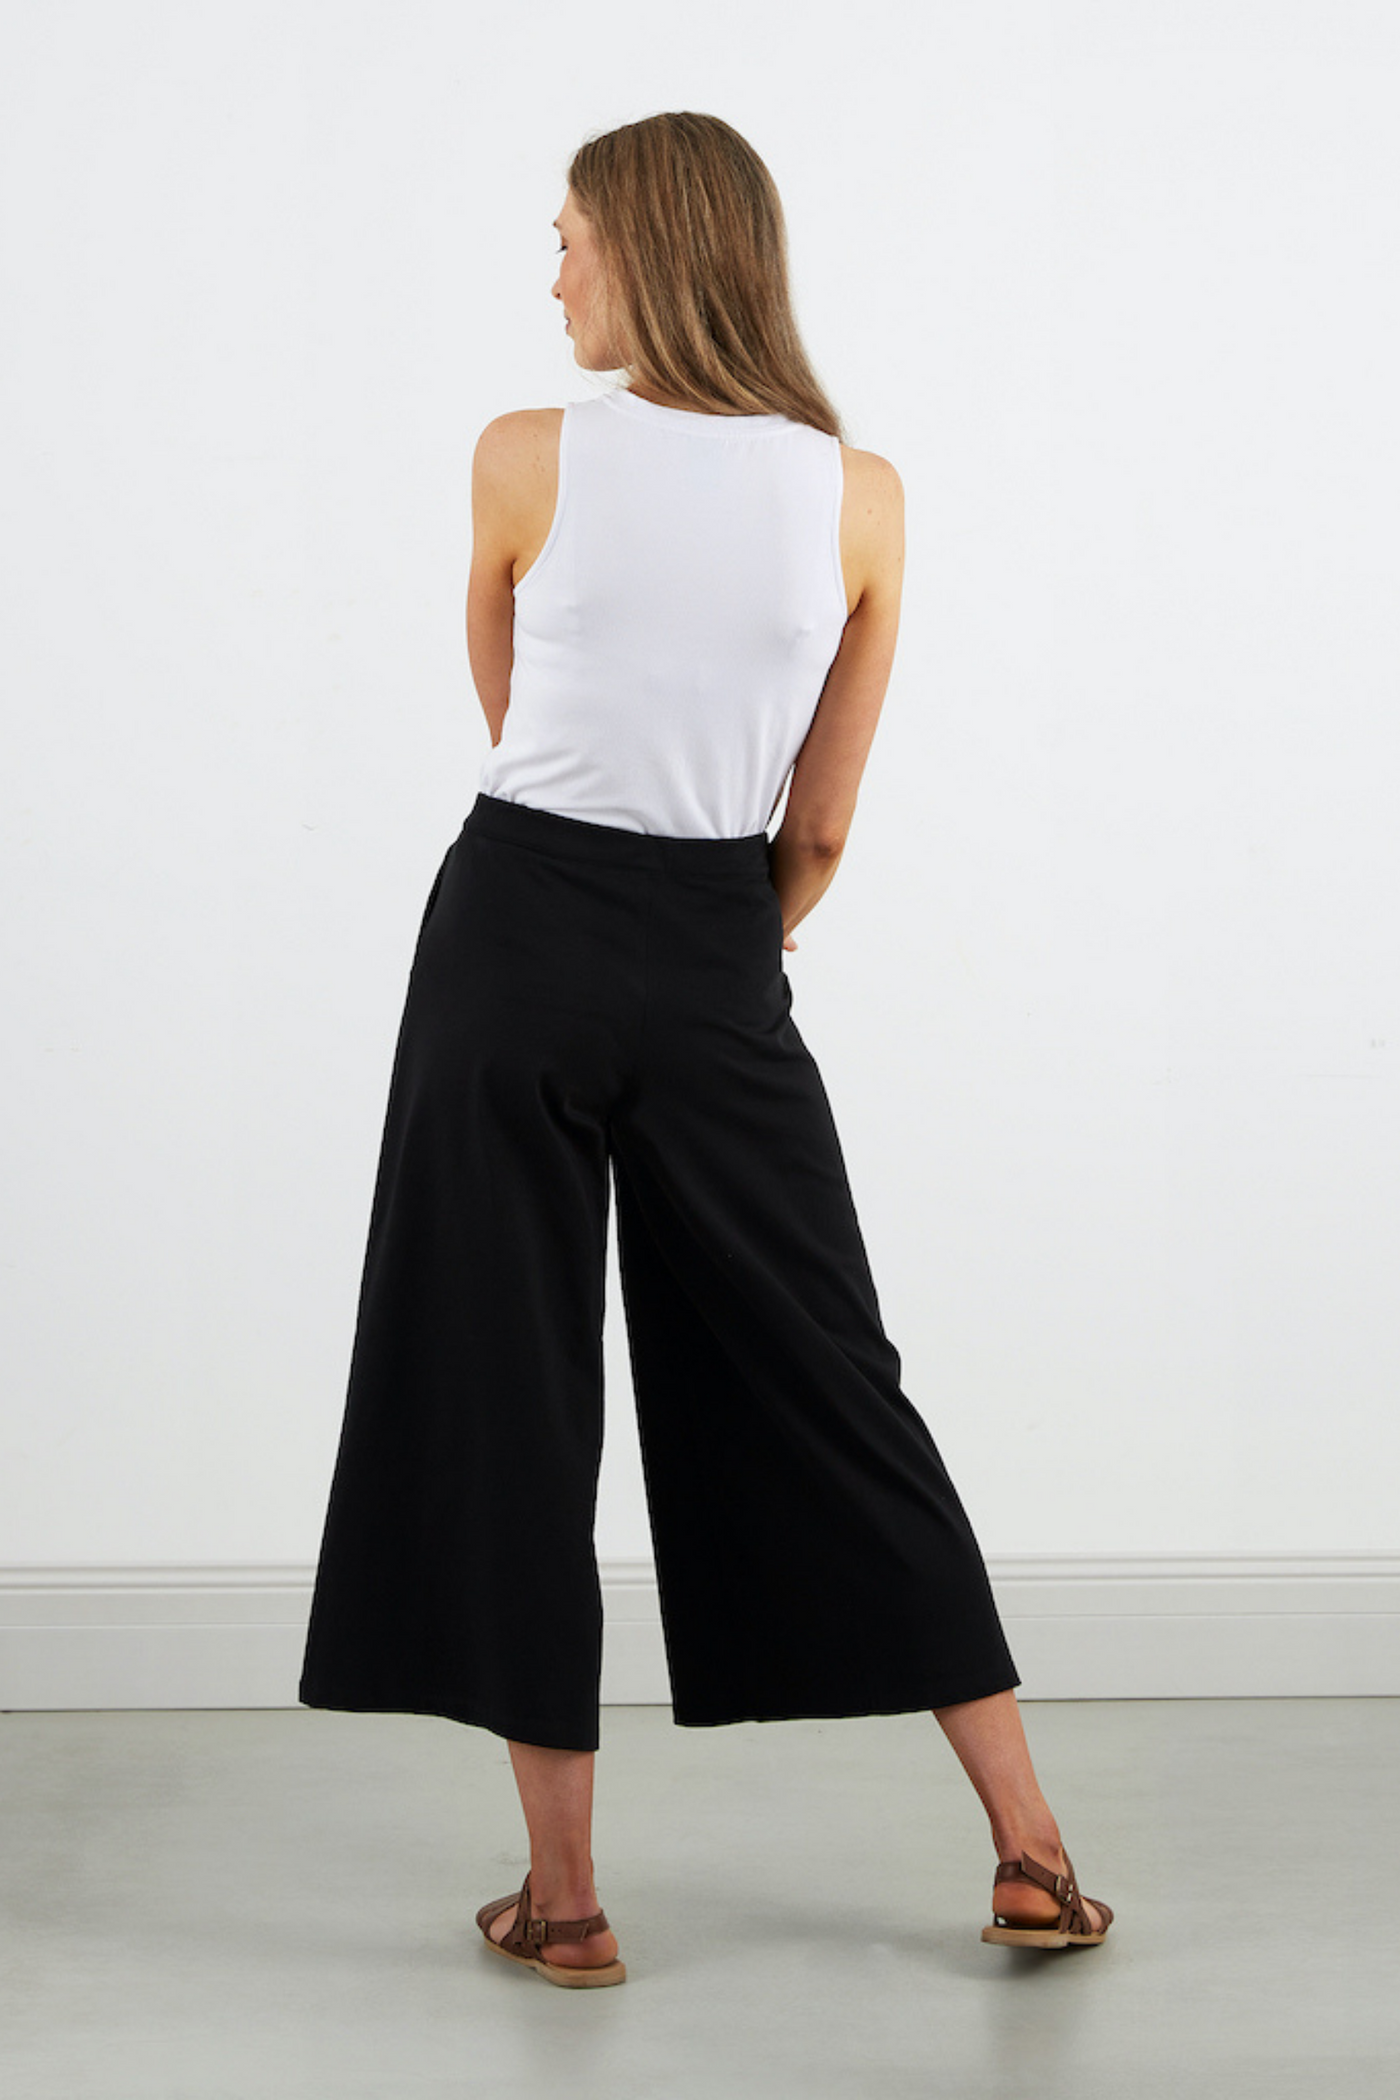 Dorsu Culottes in Black, available on ZERRIN wtih free Singapore shipping